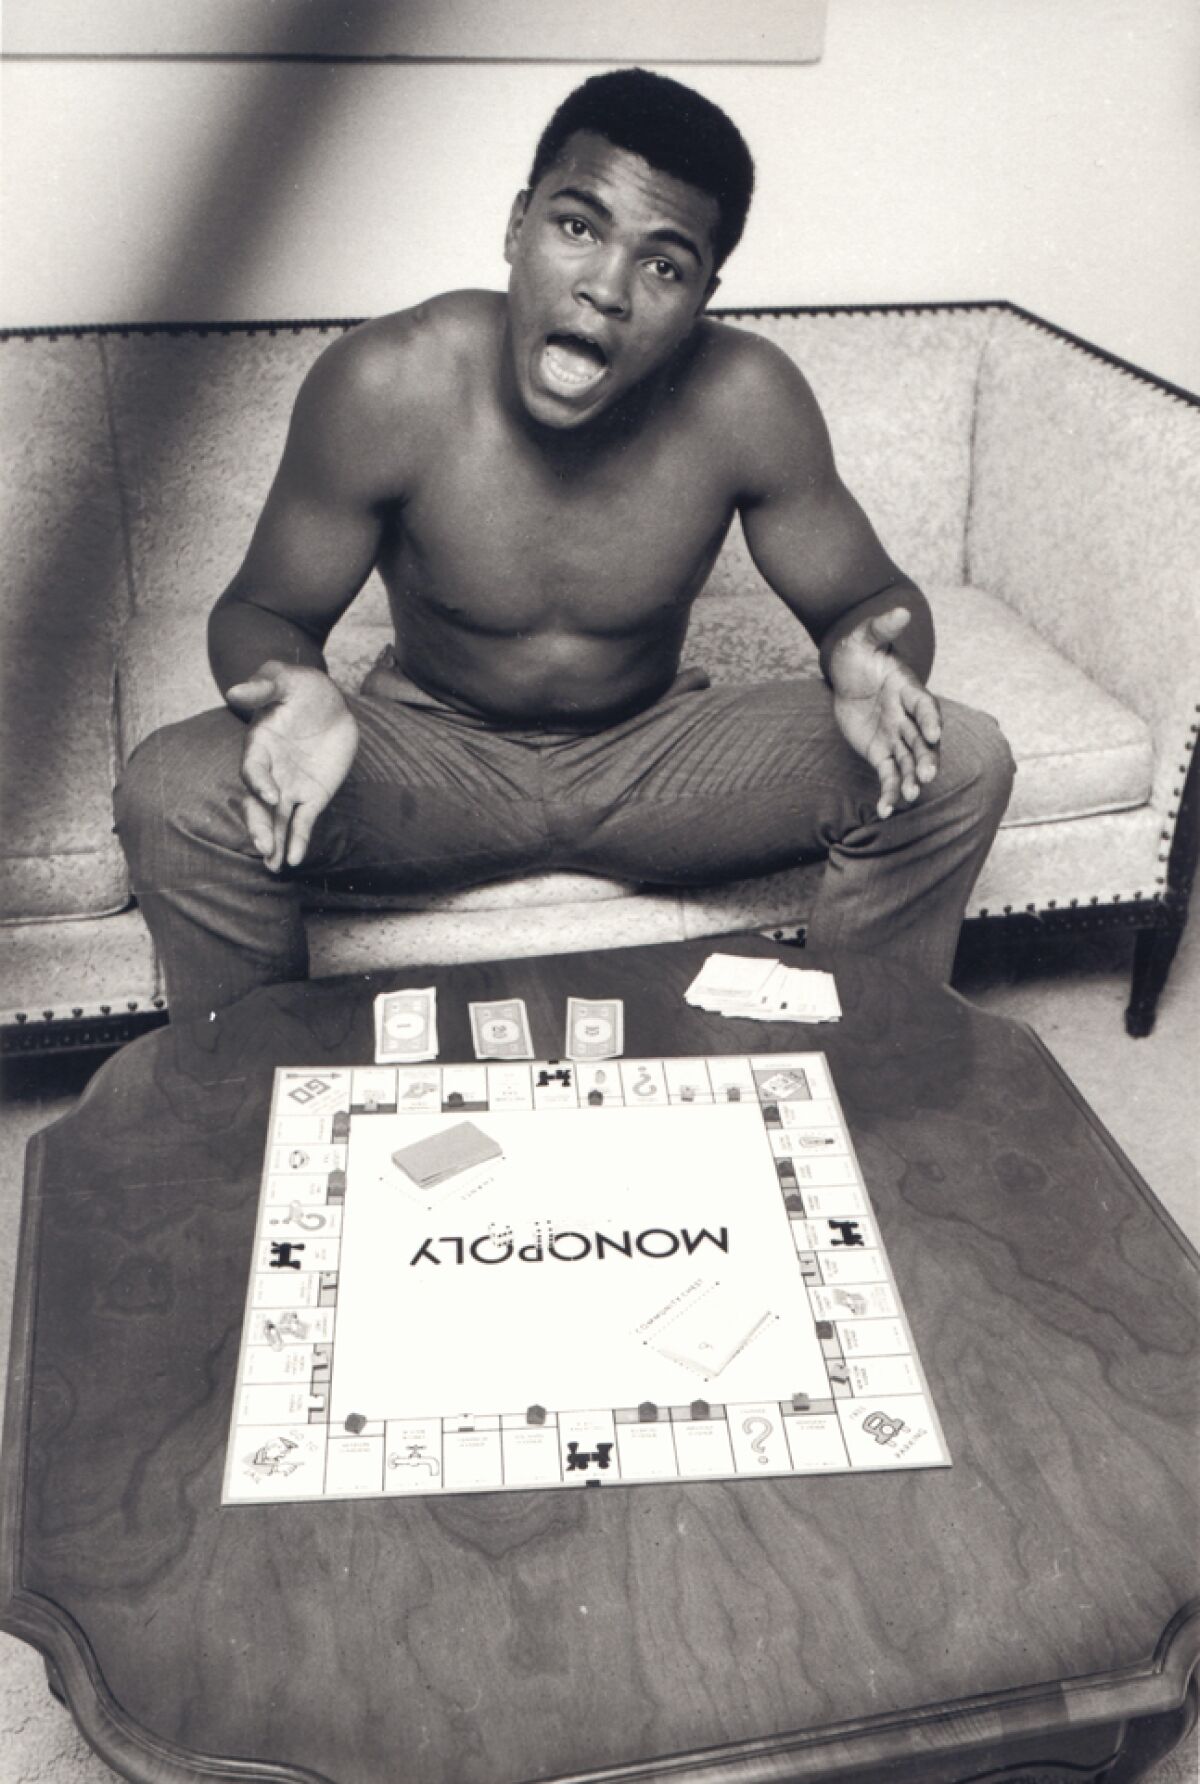 A shirtless man plays the board game Monopoly.